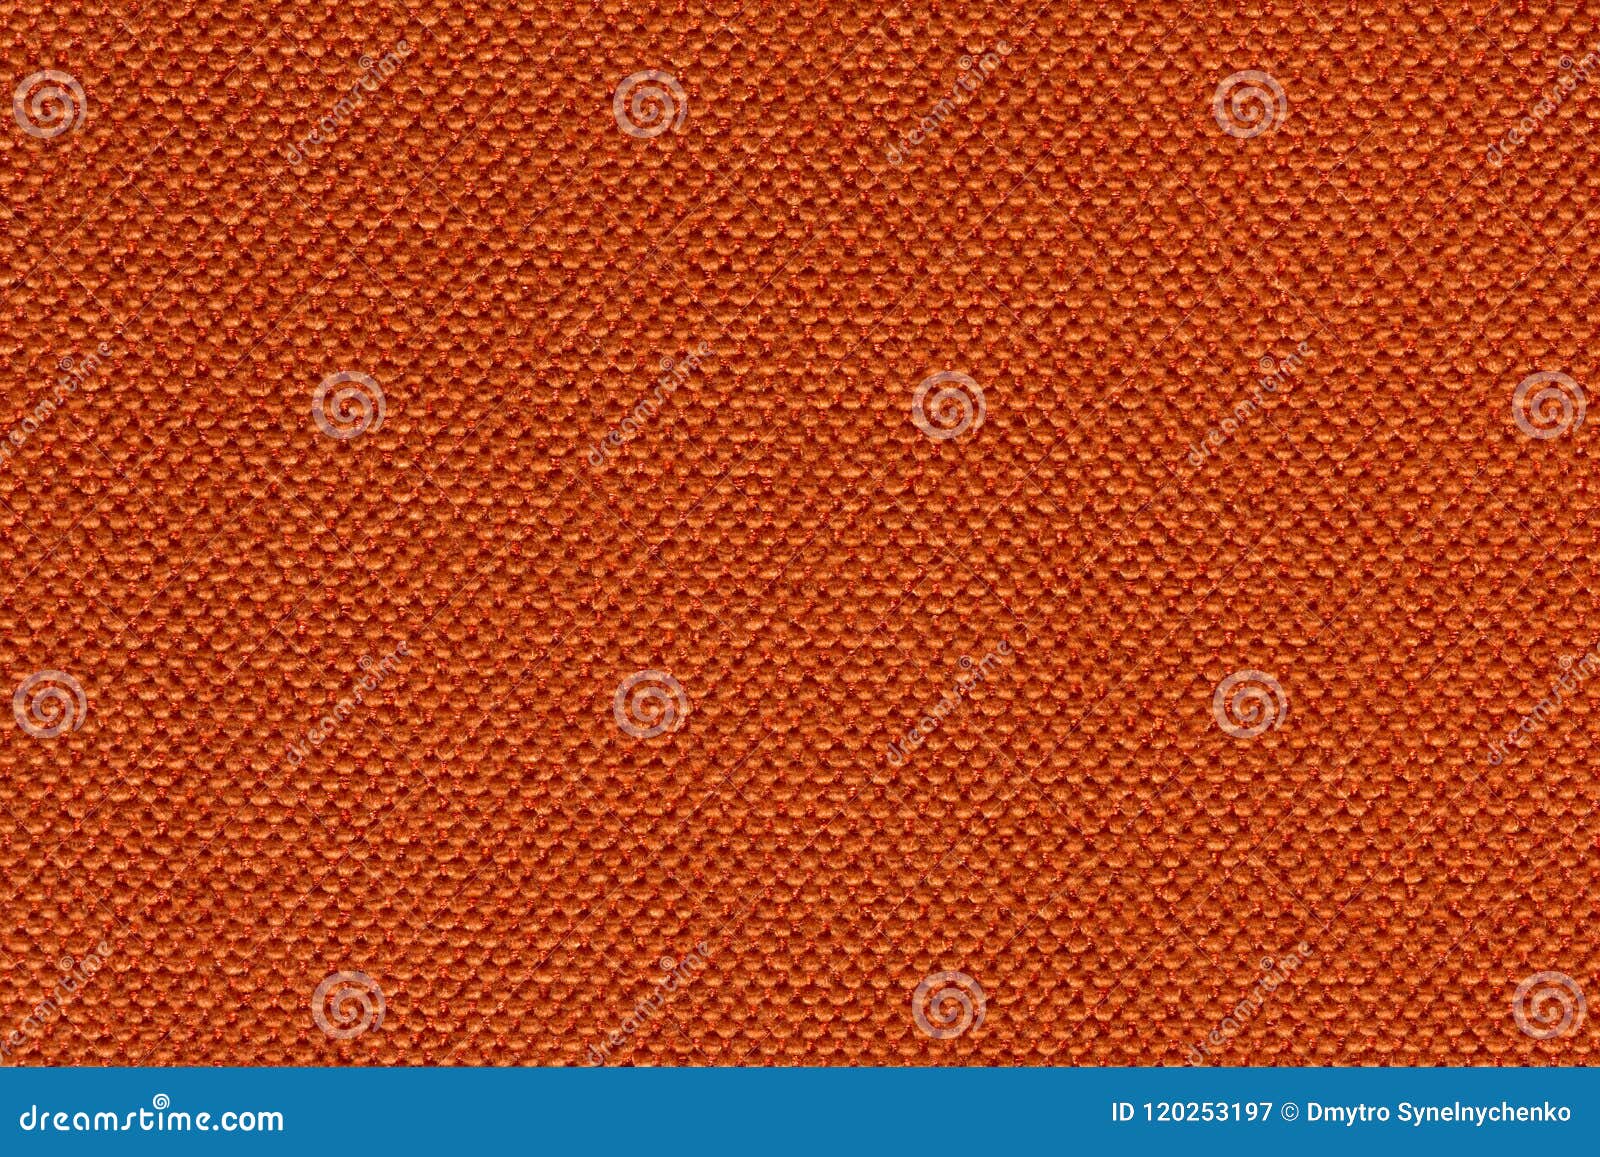 Saturated Orange Fabric Texture for Your Style. Stock Image - Image of ...